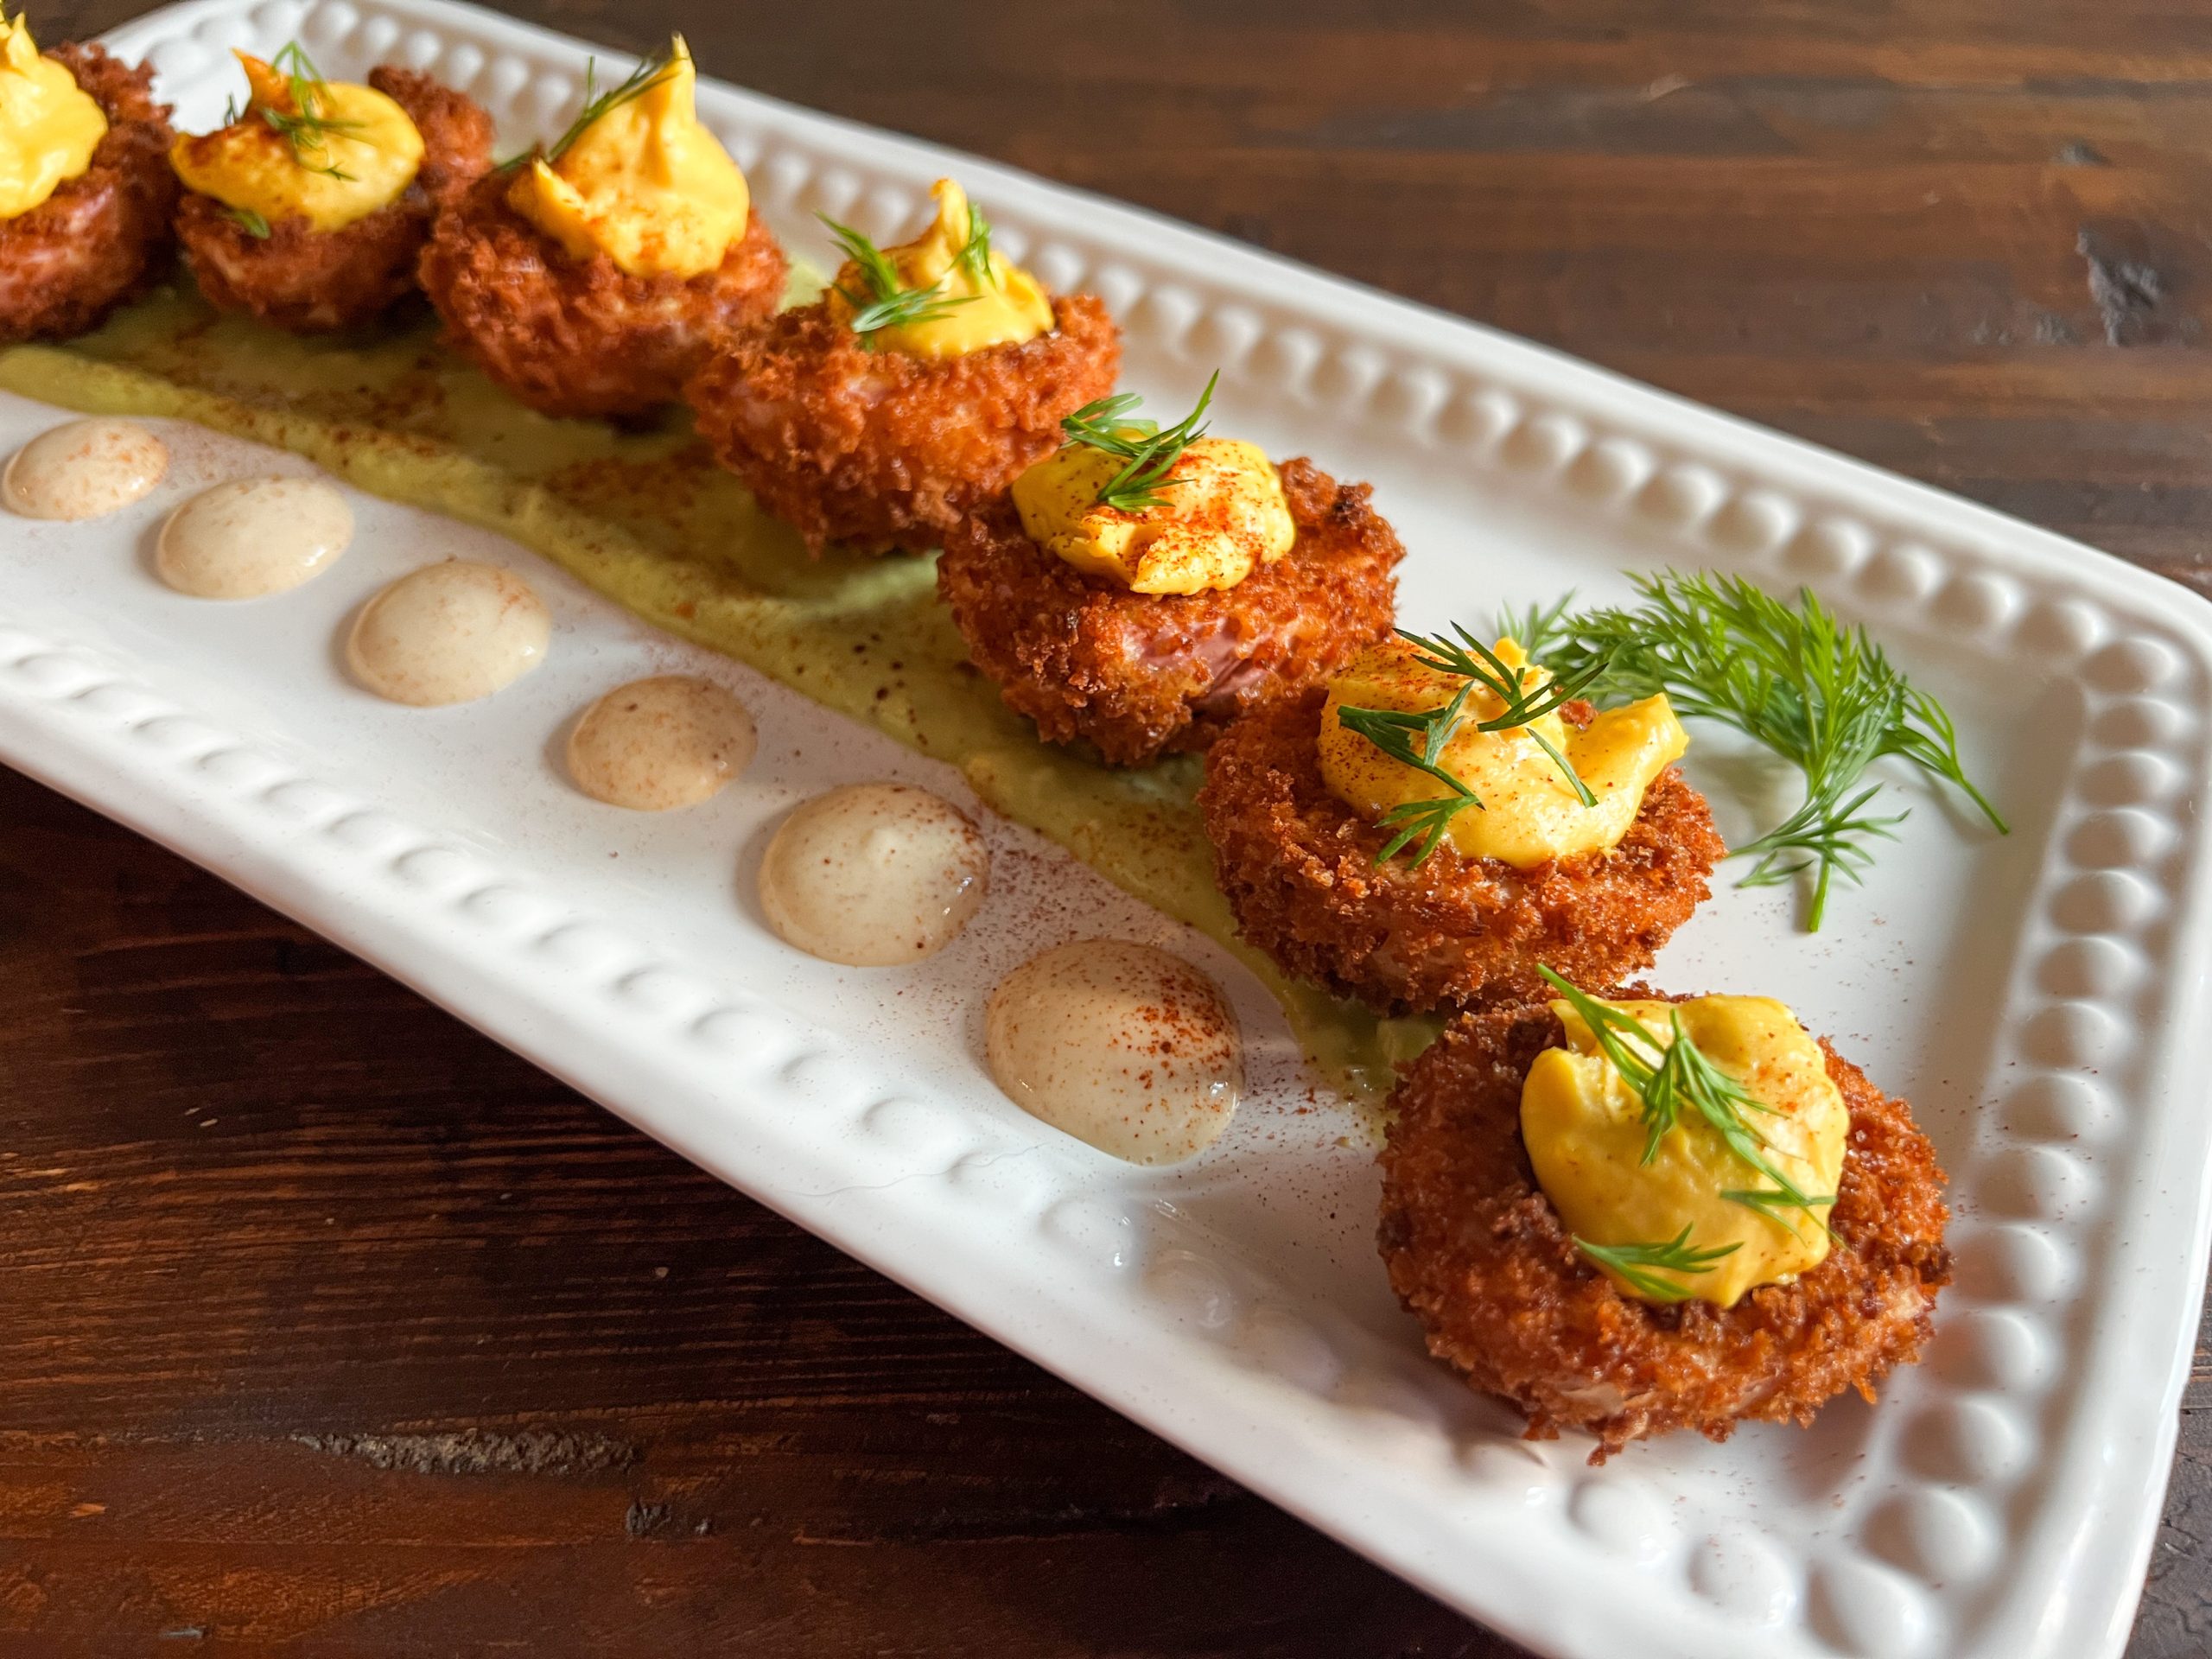 The Panko Crusted Pickled Deviled Eggs